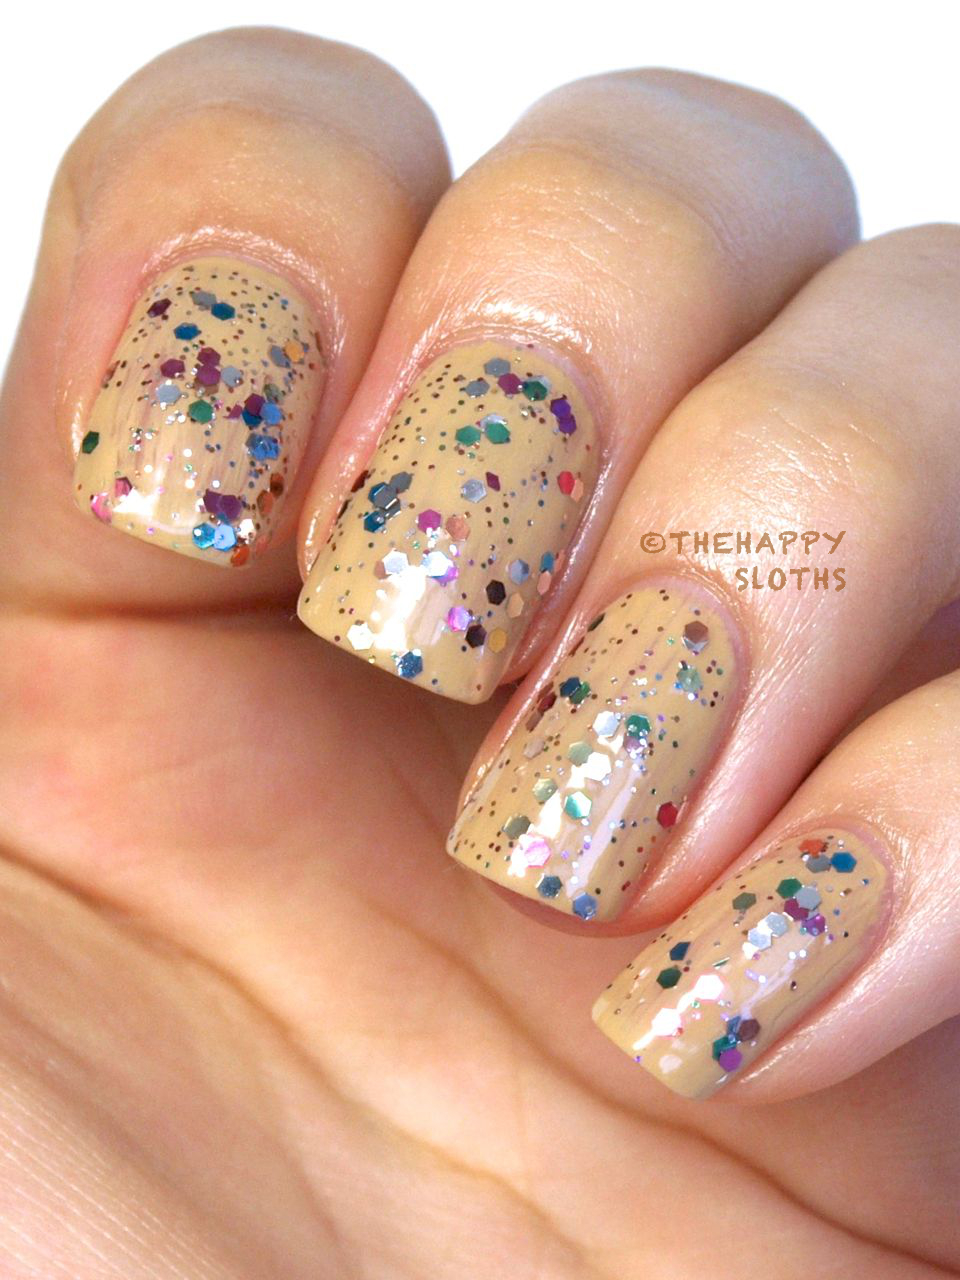 Color Show Veils Nail Polish in "Mosaic Prism": Review and Swatches